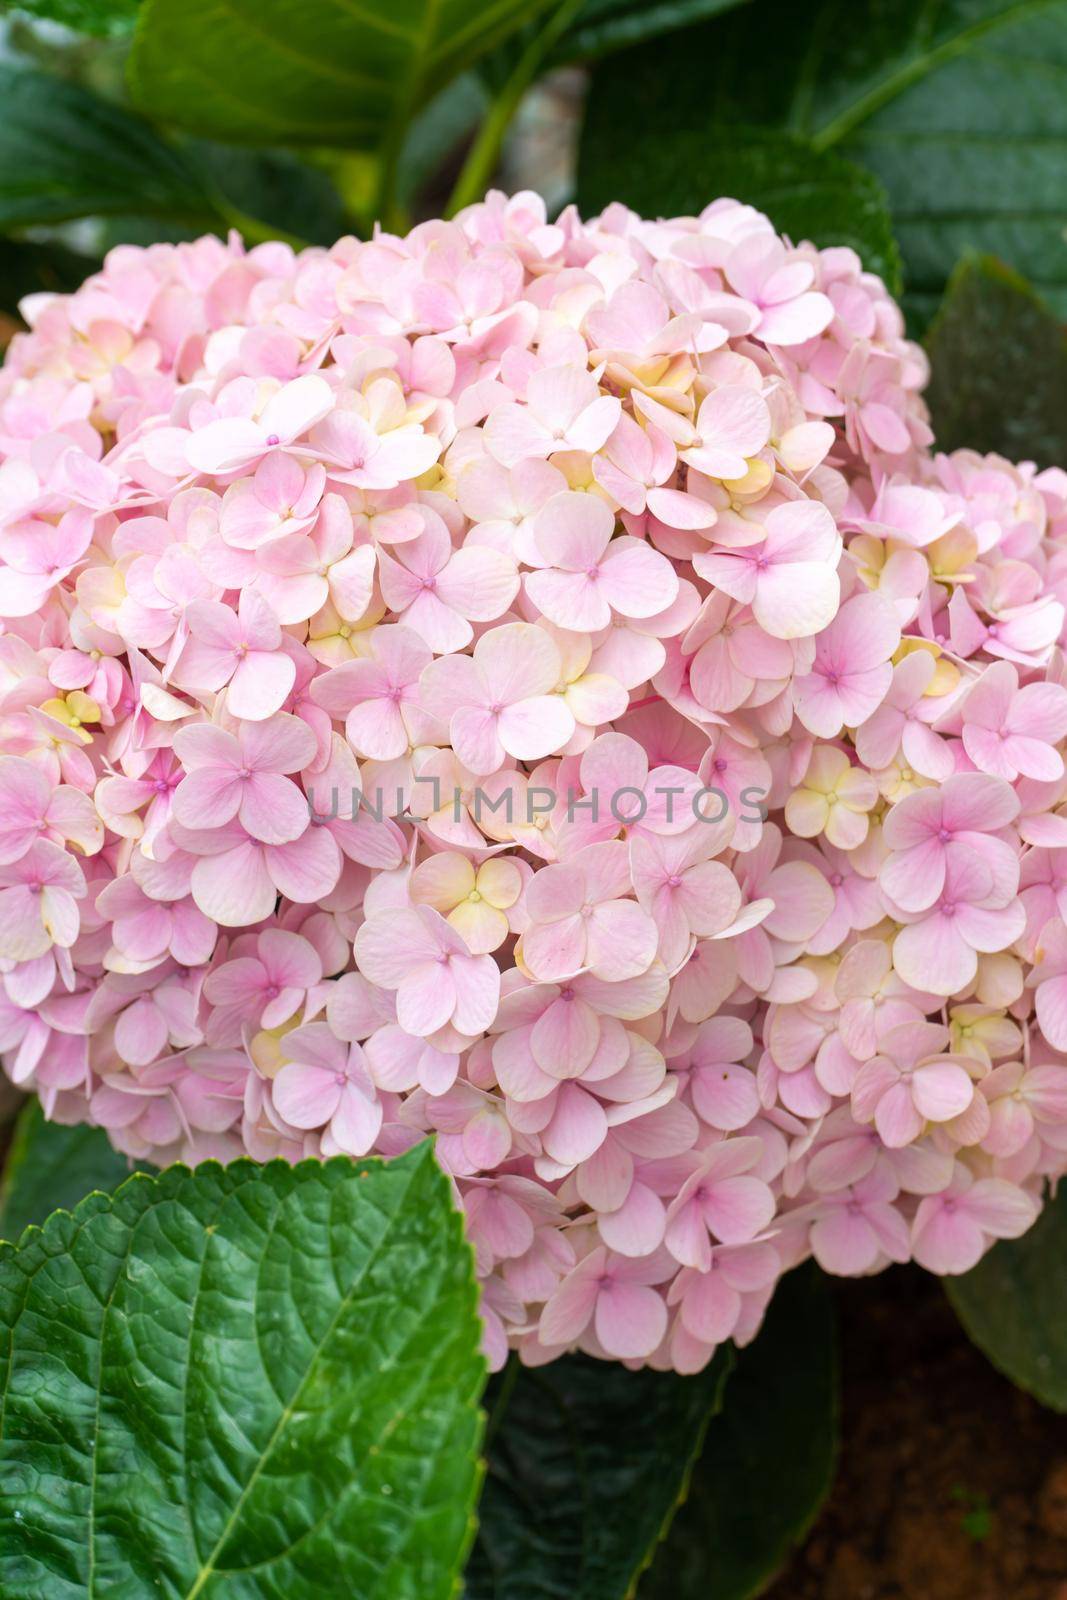 Blooming hydrangea flowers in a plant store in Asia.